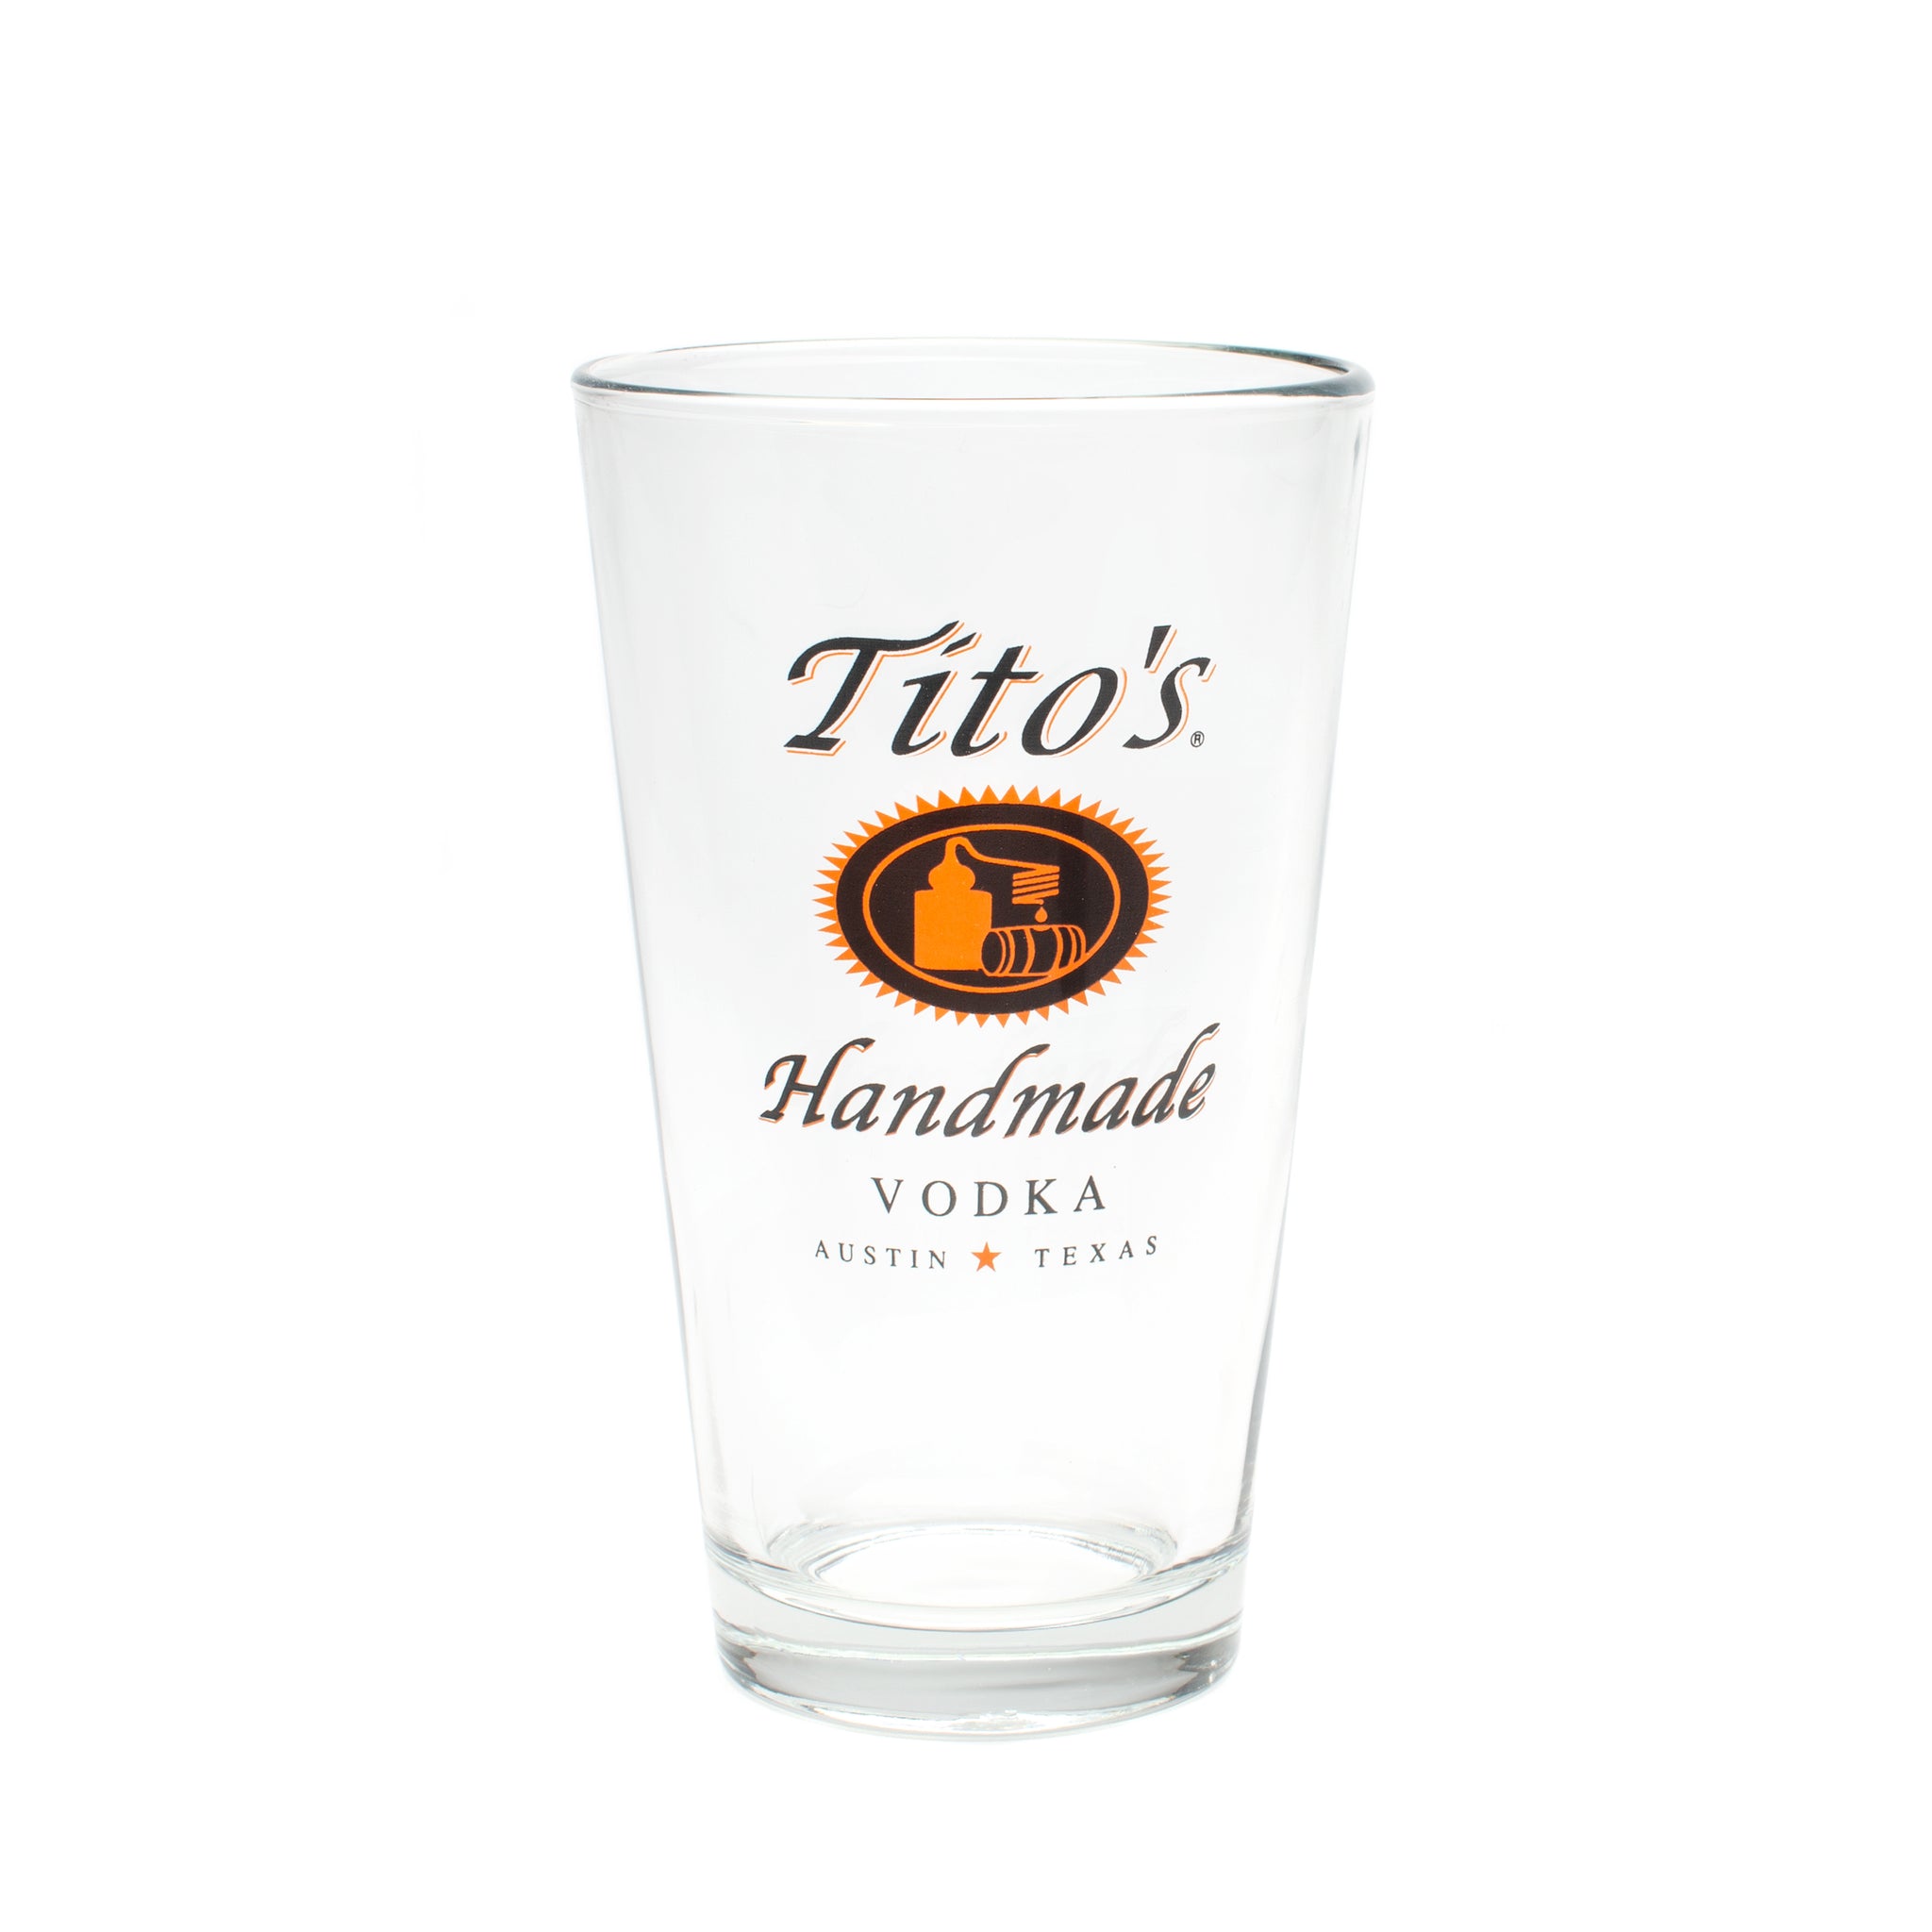 Pint glass with tito's handmade vodka logo on one side